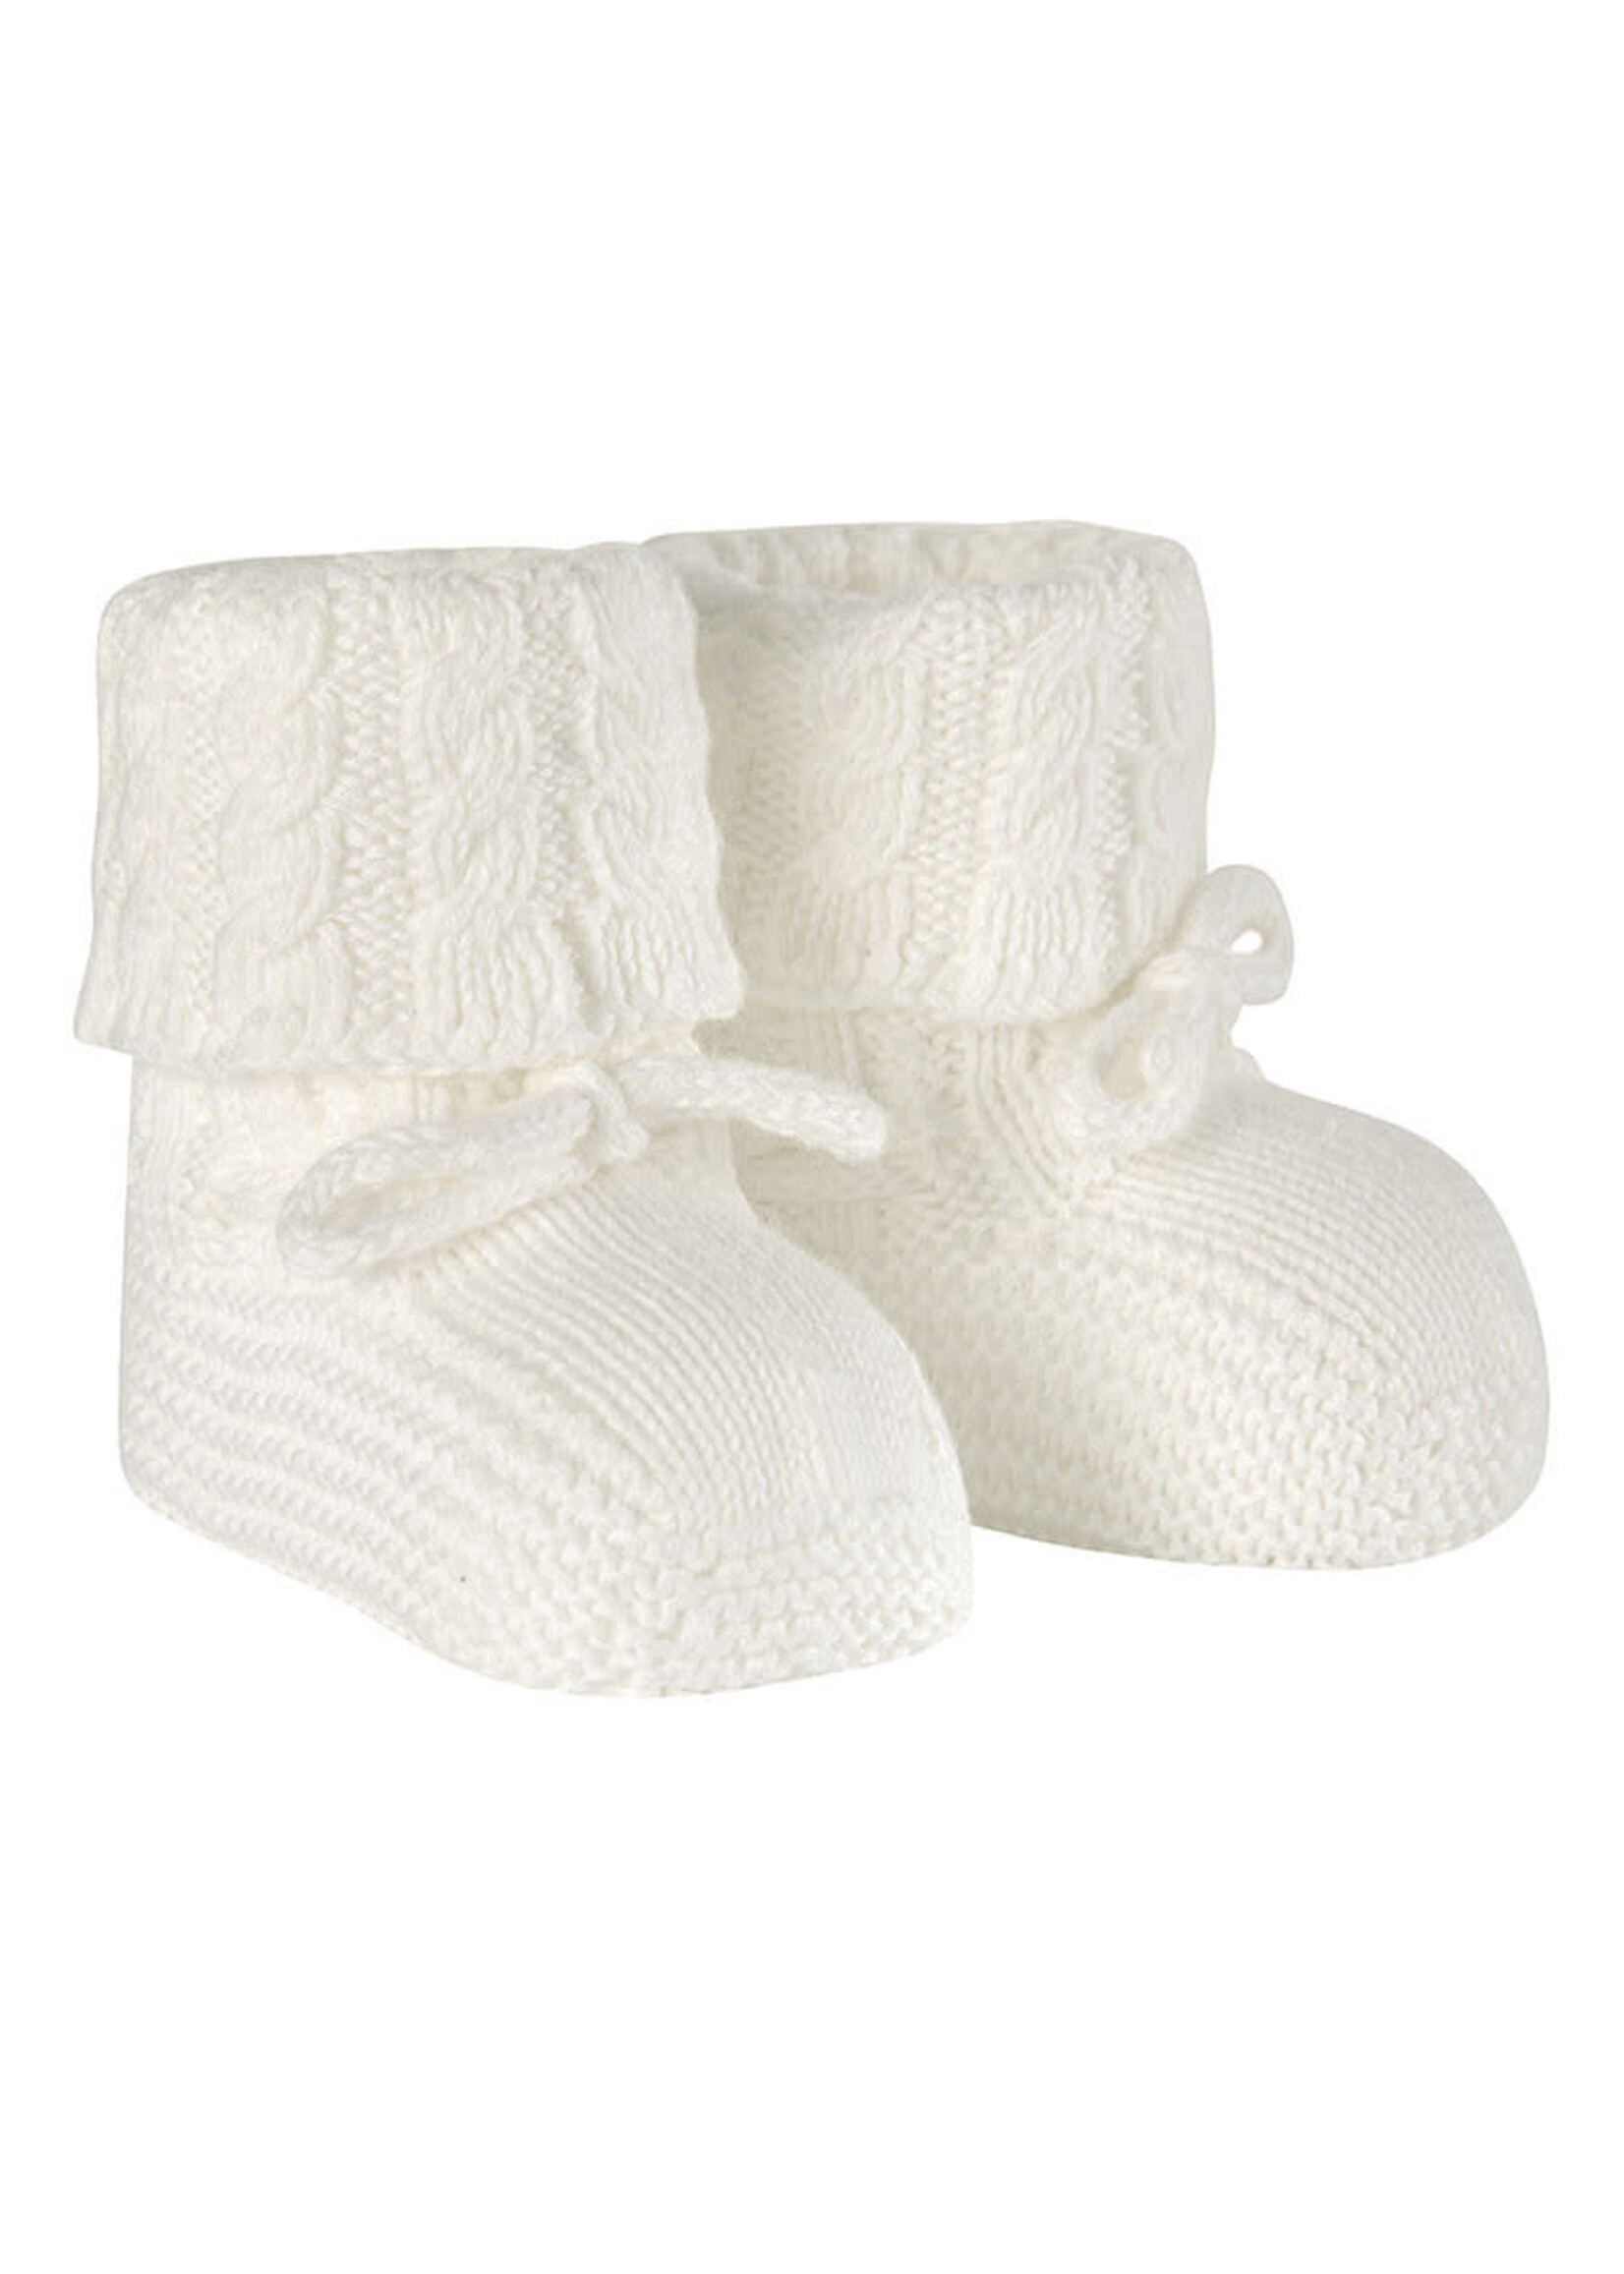 Condor Stitch Baby Booties with folded cuff Off White  - Condor